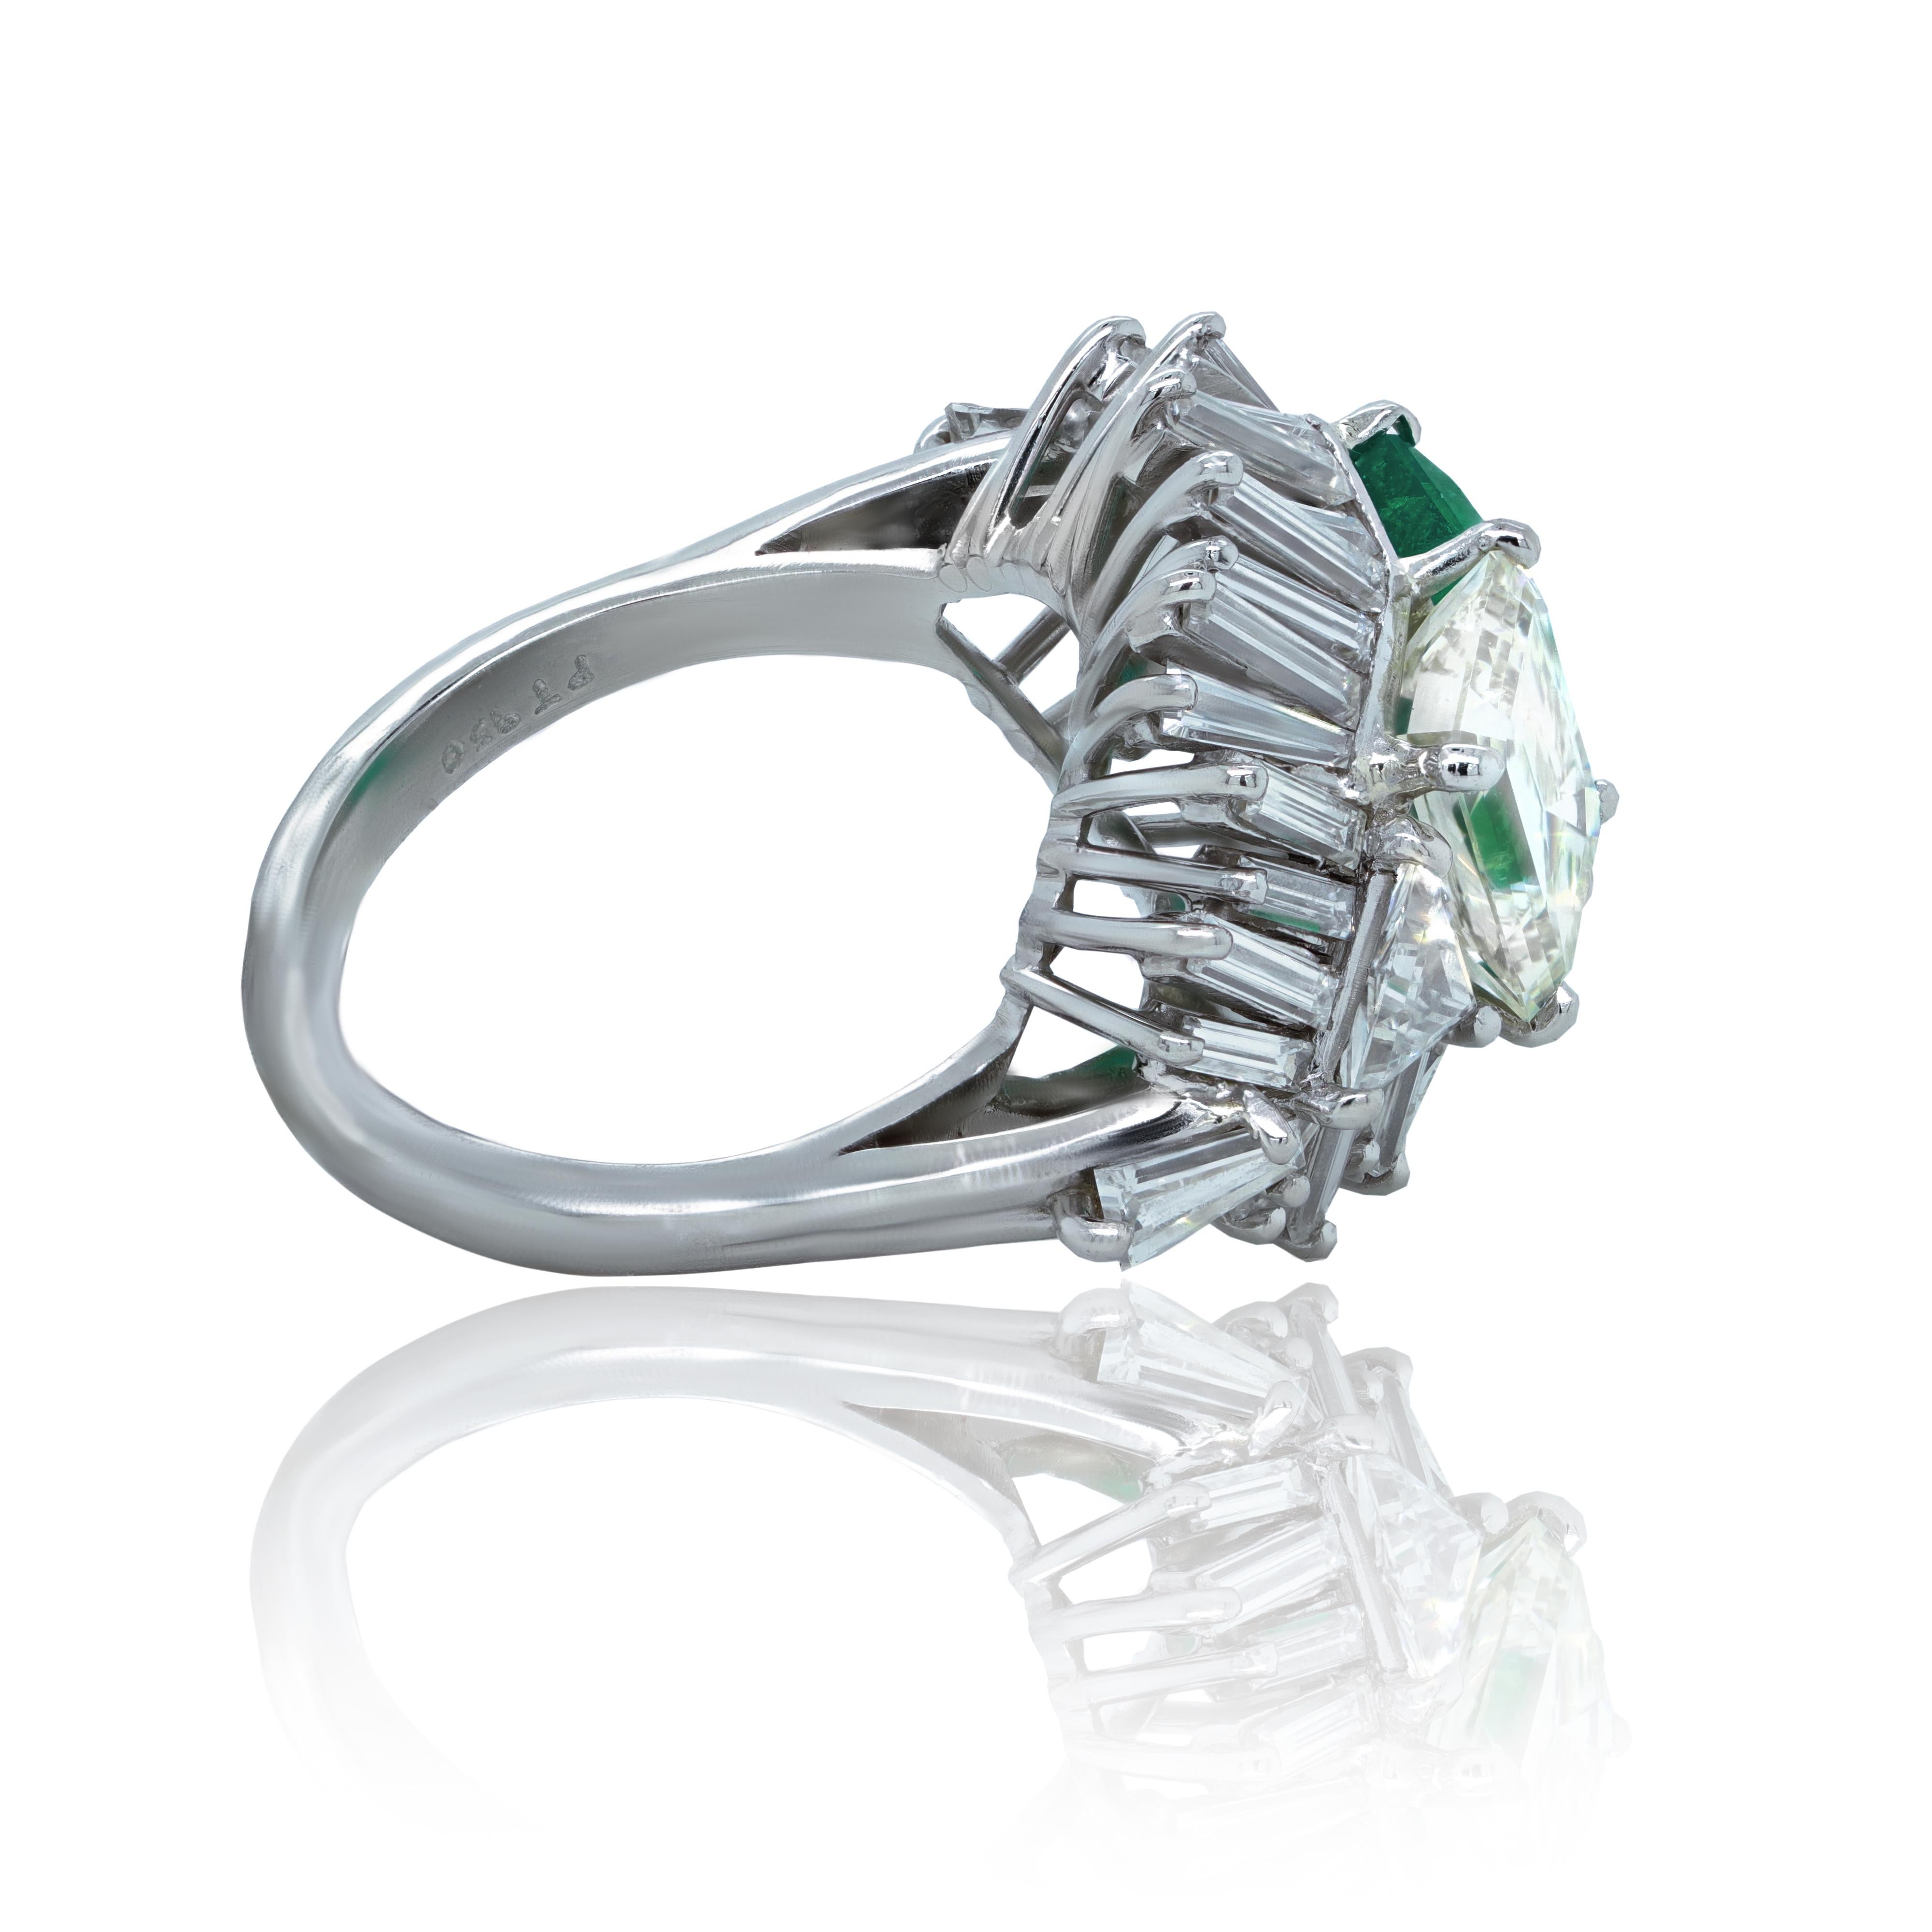 Platinum Estate Green emerald and diamond ring, feature 2.15 Carat Emerald cut Emerald set with 2.05 Carat GIA Certified Emerald cut diamond, surrounded by 1.95 carats of baguette diamonds. 